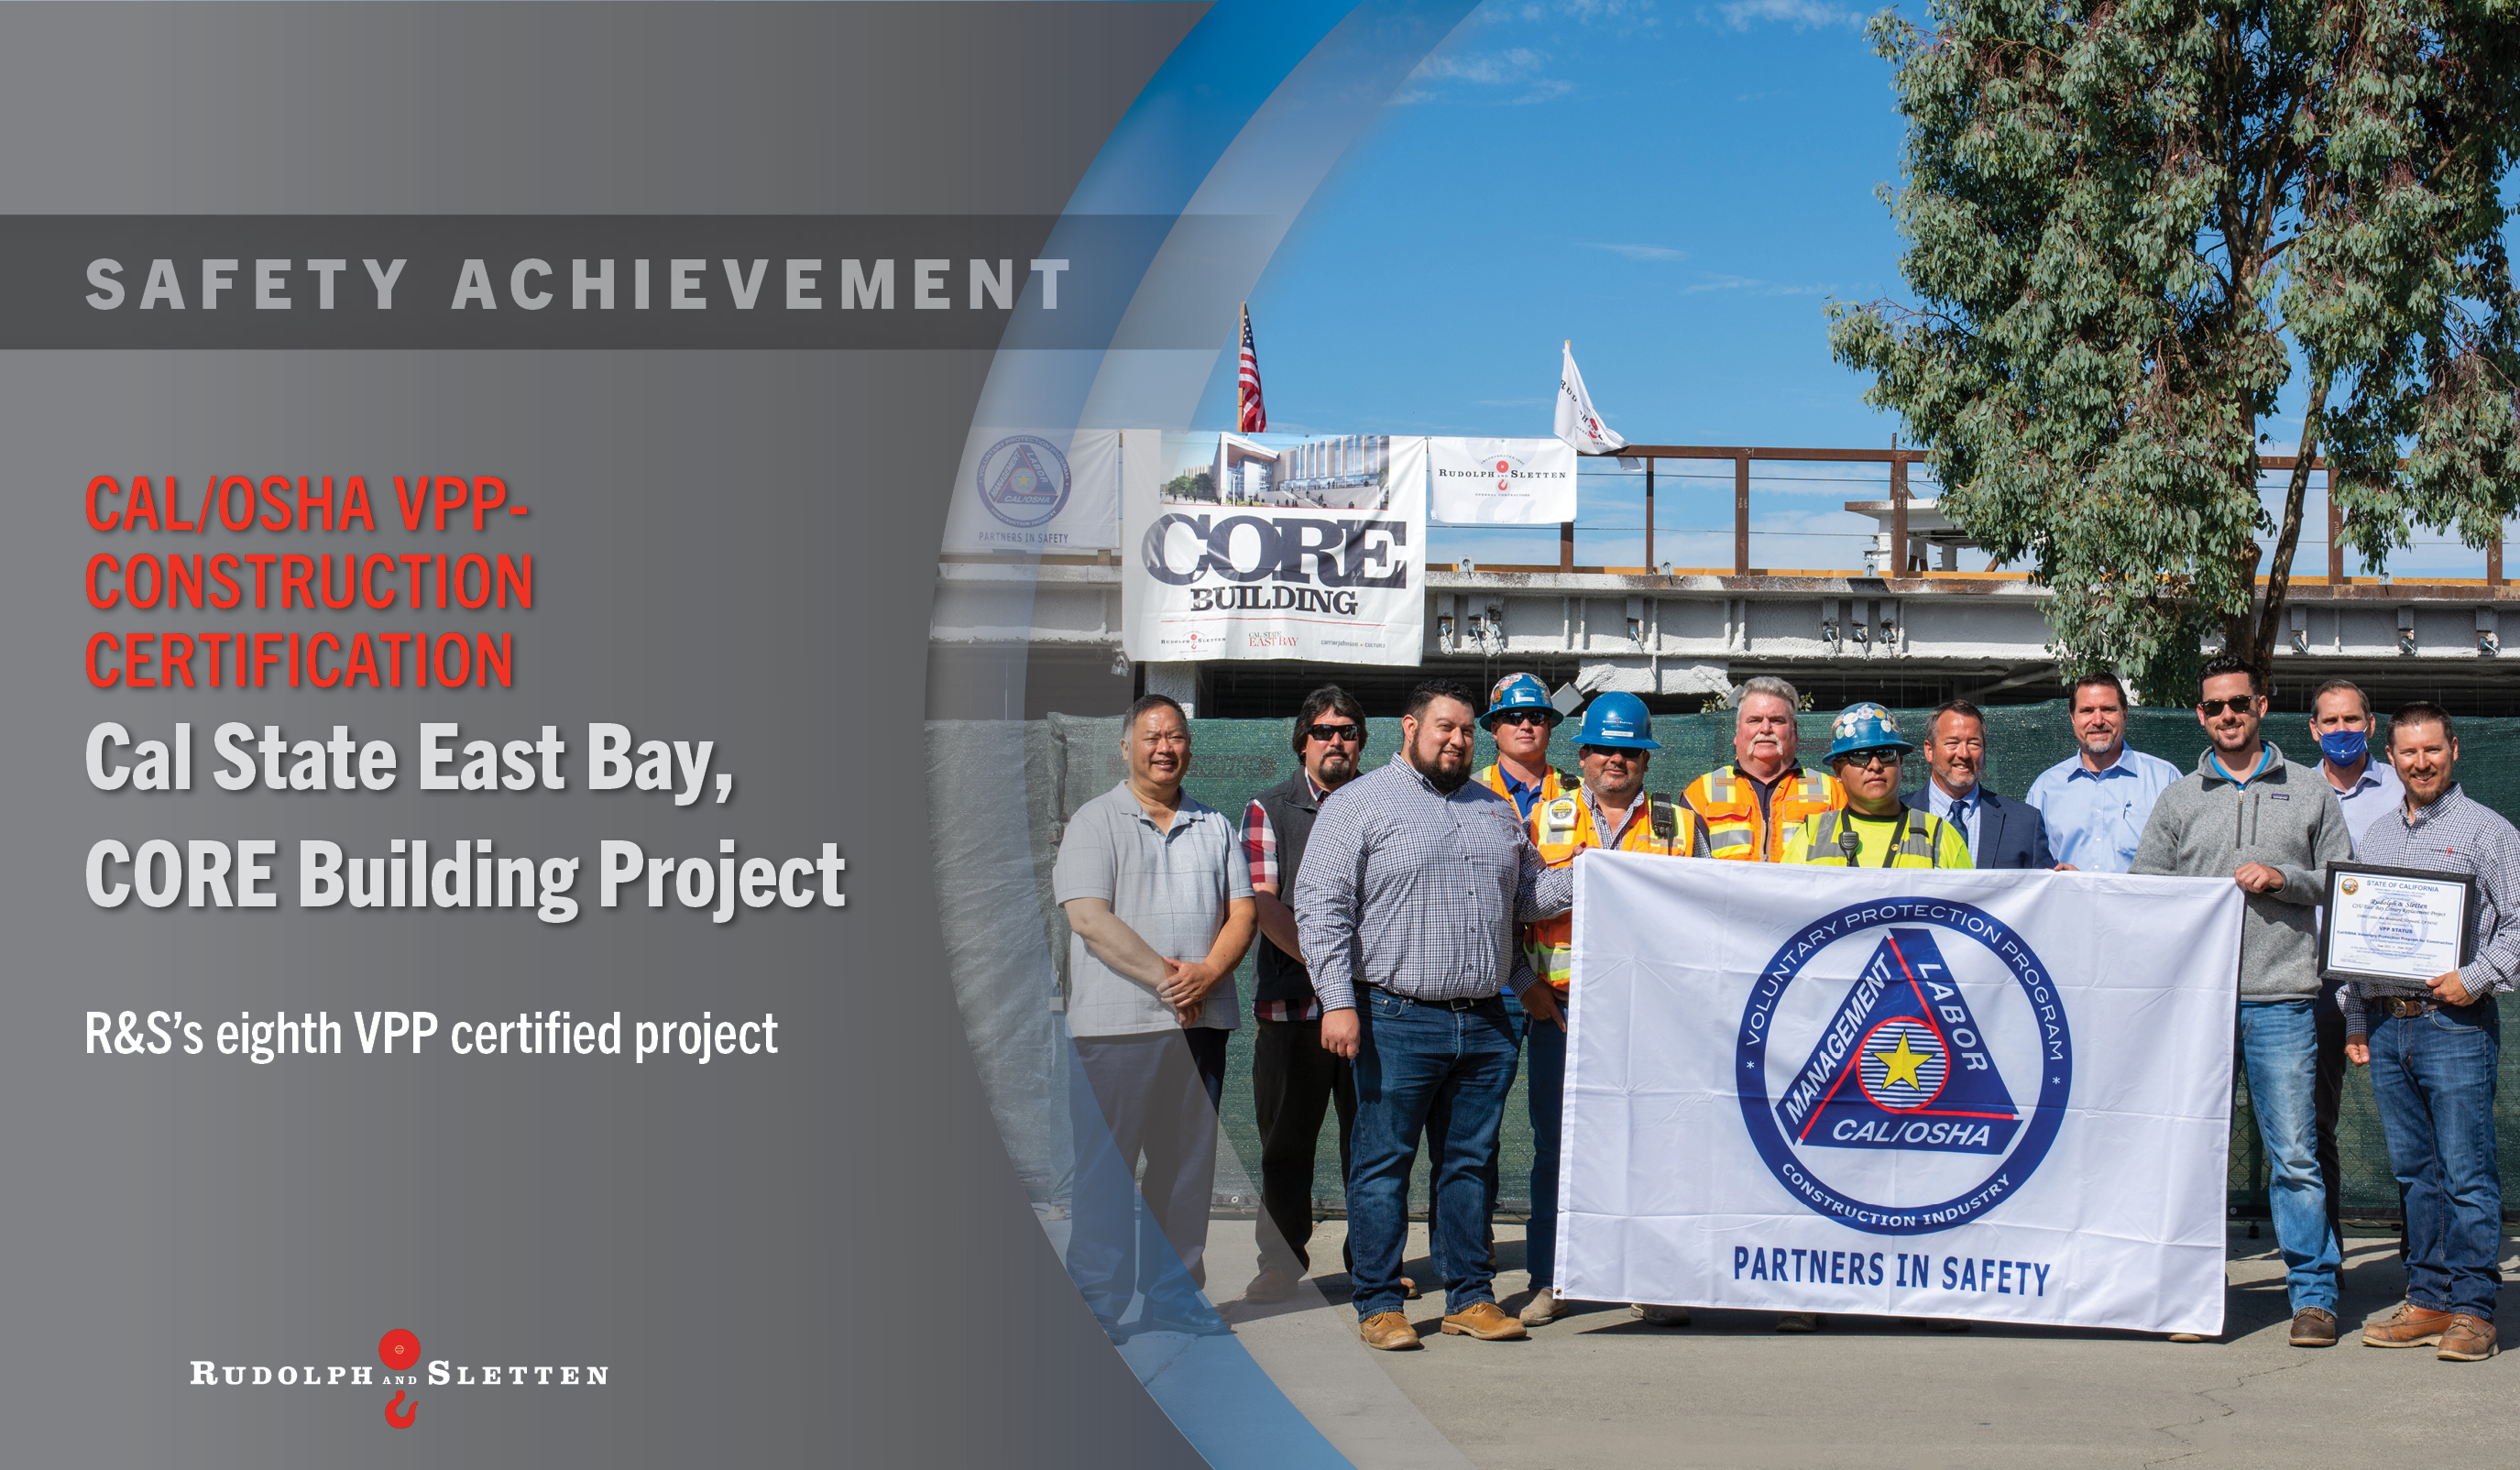 Cal State East Bay CORE Project Team secures R&S’s Eighth VPP certified project